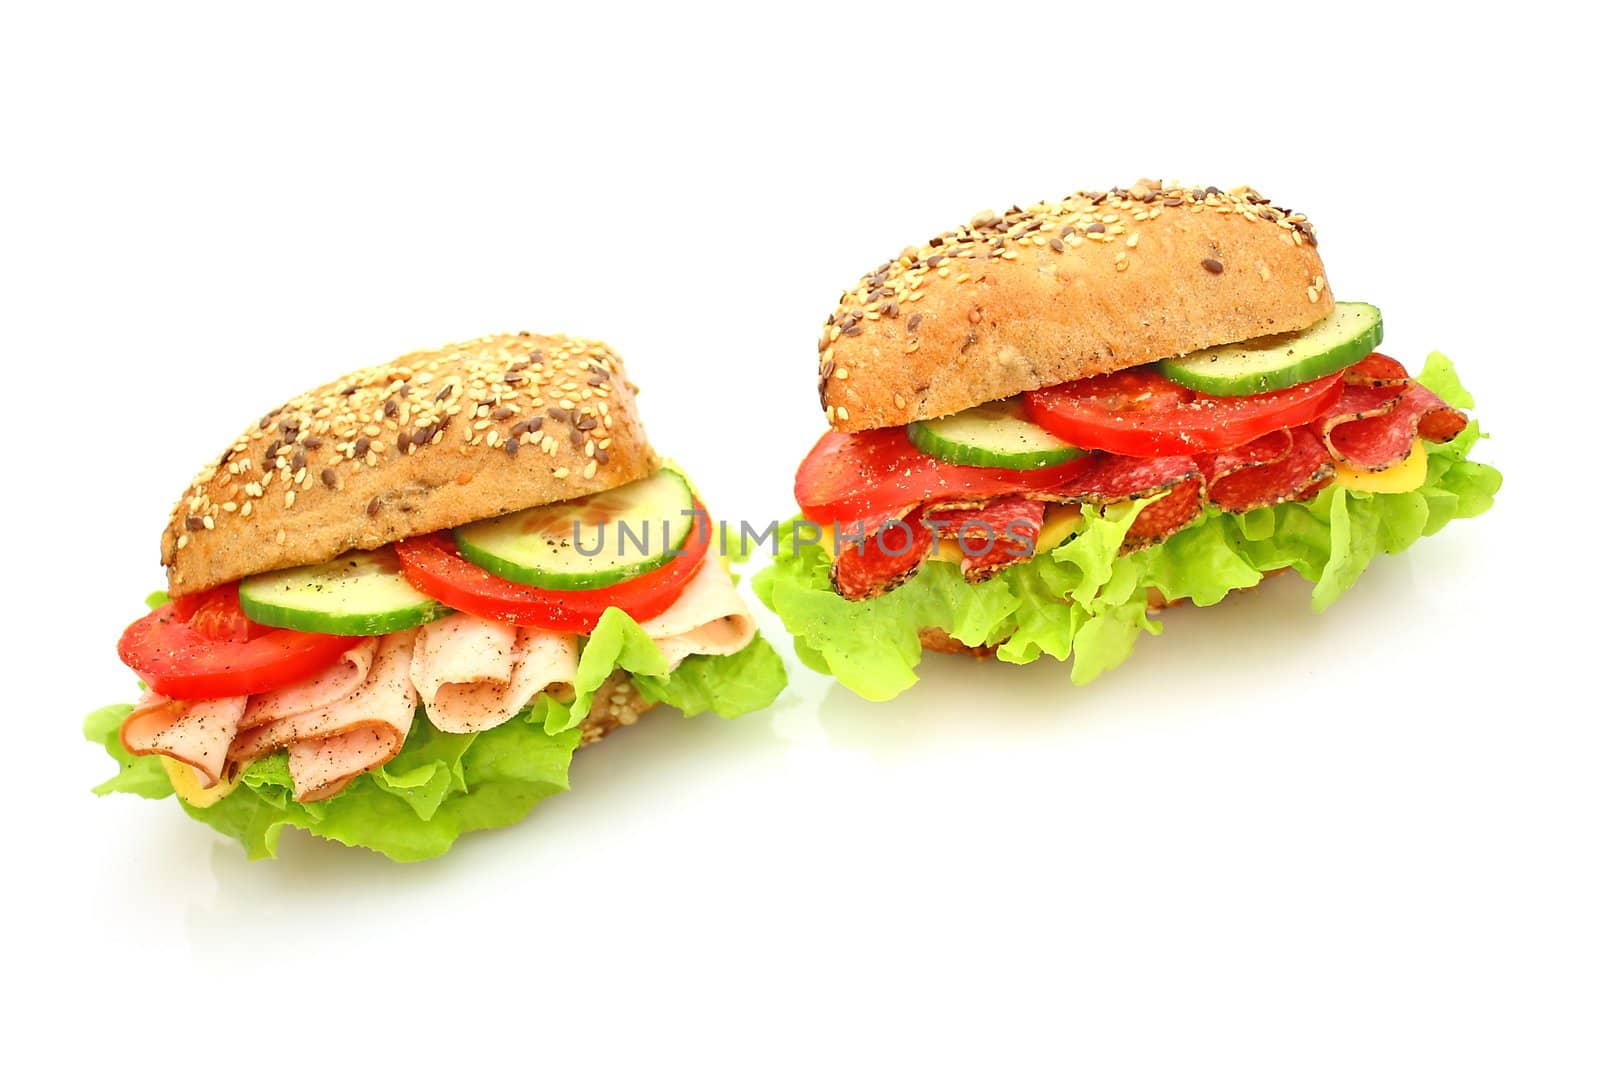 Fresh sandwich with vegetables